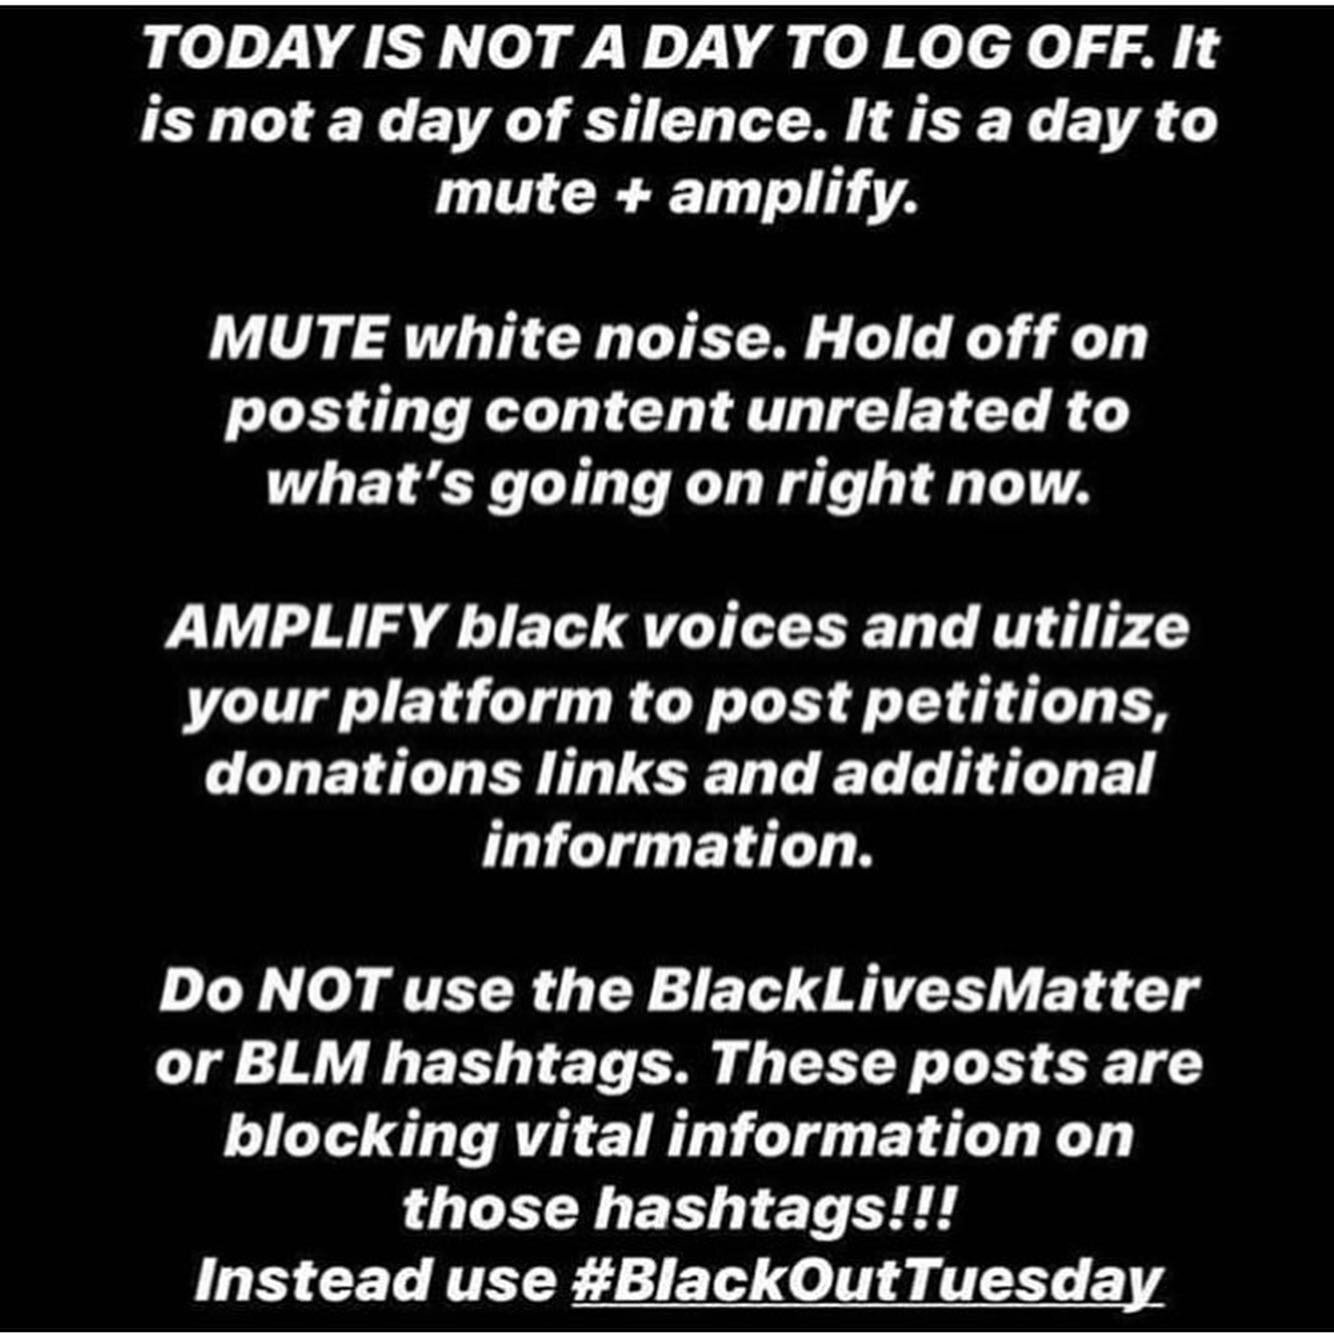 Action steps in my bio, stories and highlights! Keep learning, keep reading, keep donating, keep having tough conversations, keep showing up. #amplifymelanatedvoices